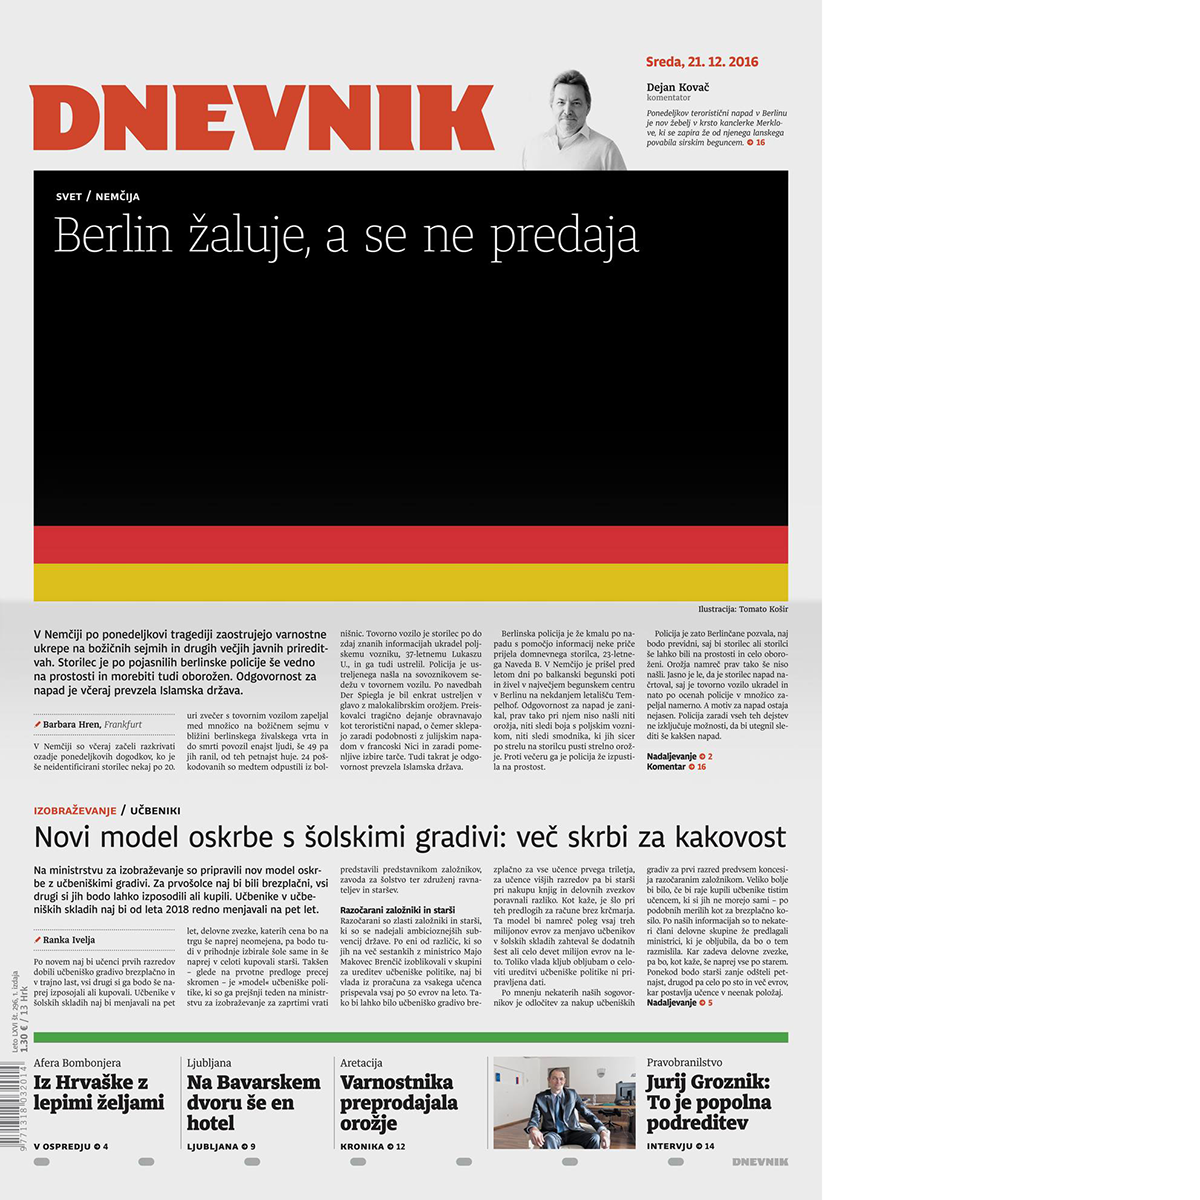 newspaper cover newspapers covers jacket frontpage Photoillustrations photoillustration political provocative visual communications slovenia TomatoKosir